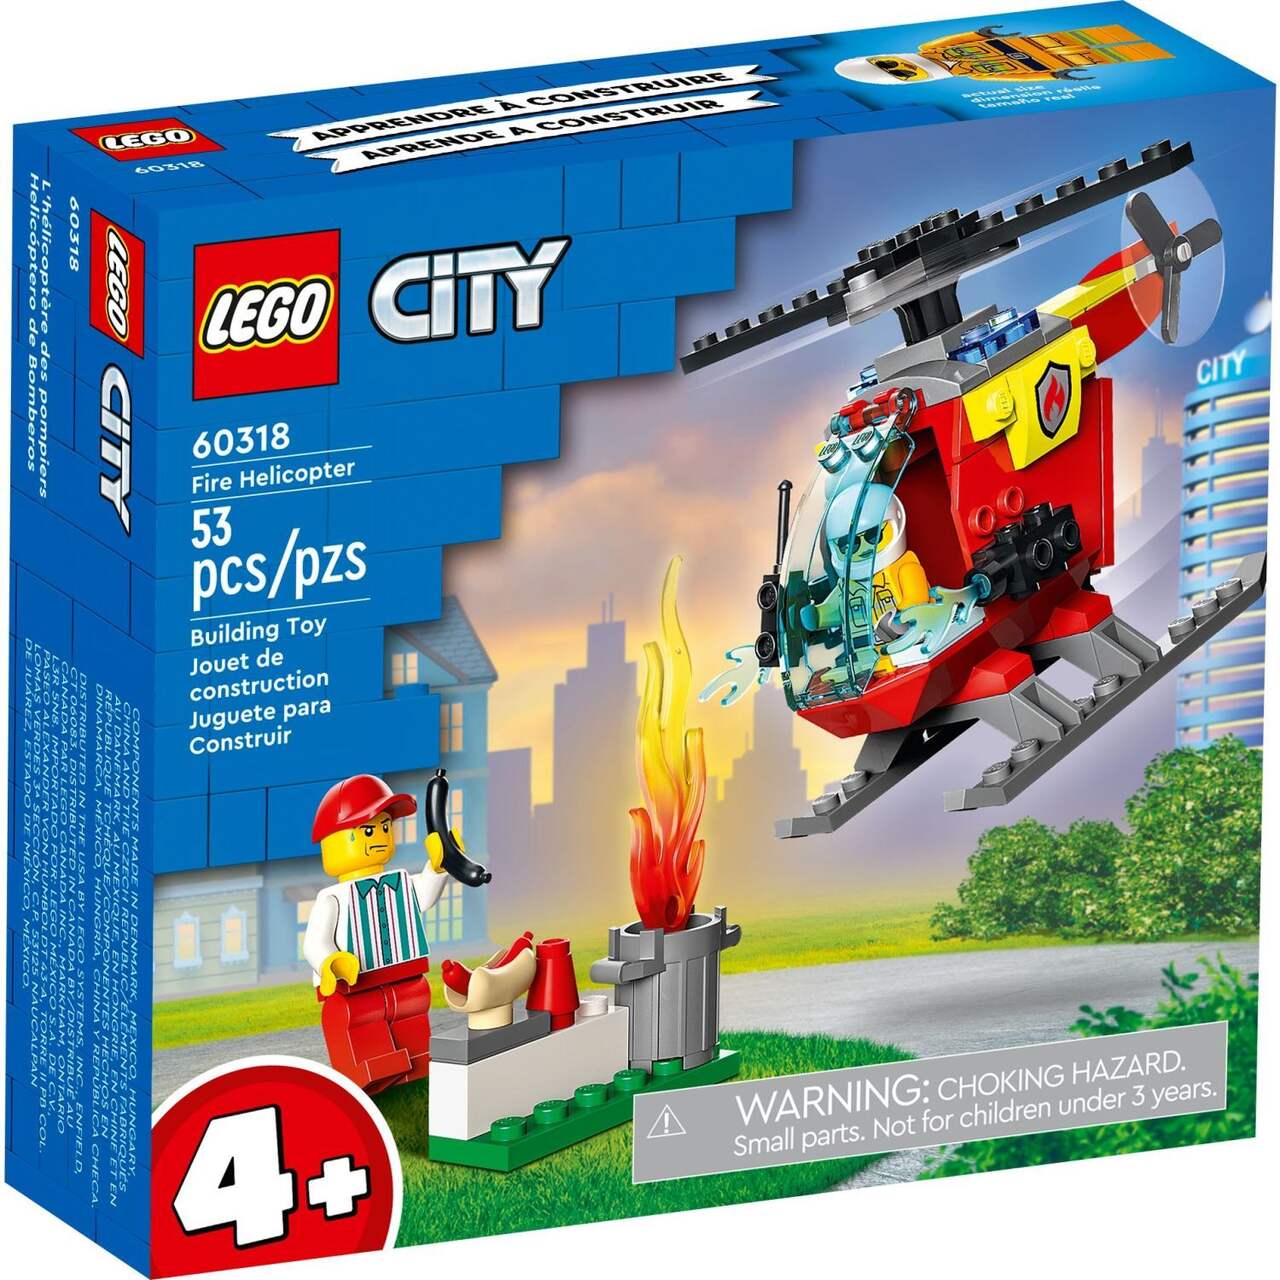 https://media-www.canadiantire.ca/product/seasonal-gardening/toys/toys-games/0508627/lego-fire-helicopter-4f13ad1c-4e06-4ea4-9352-0ce5baeb8f13-jpgrendition.jpg?imdensity=1&imwidth=640&impolicy=mZoom